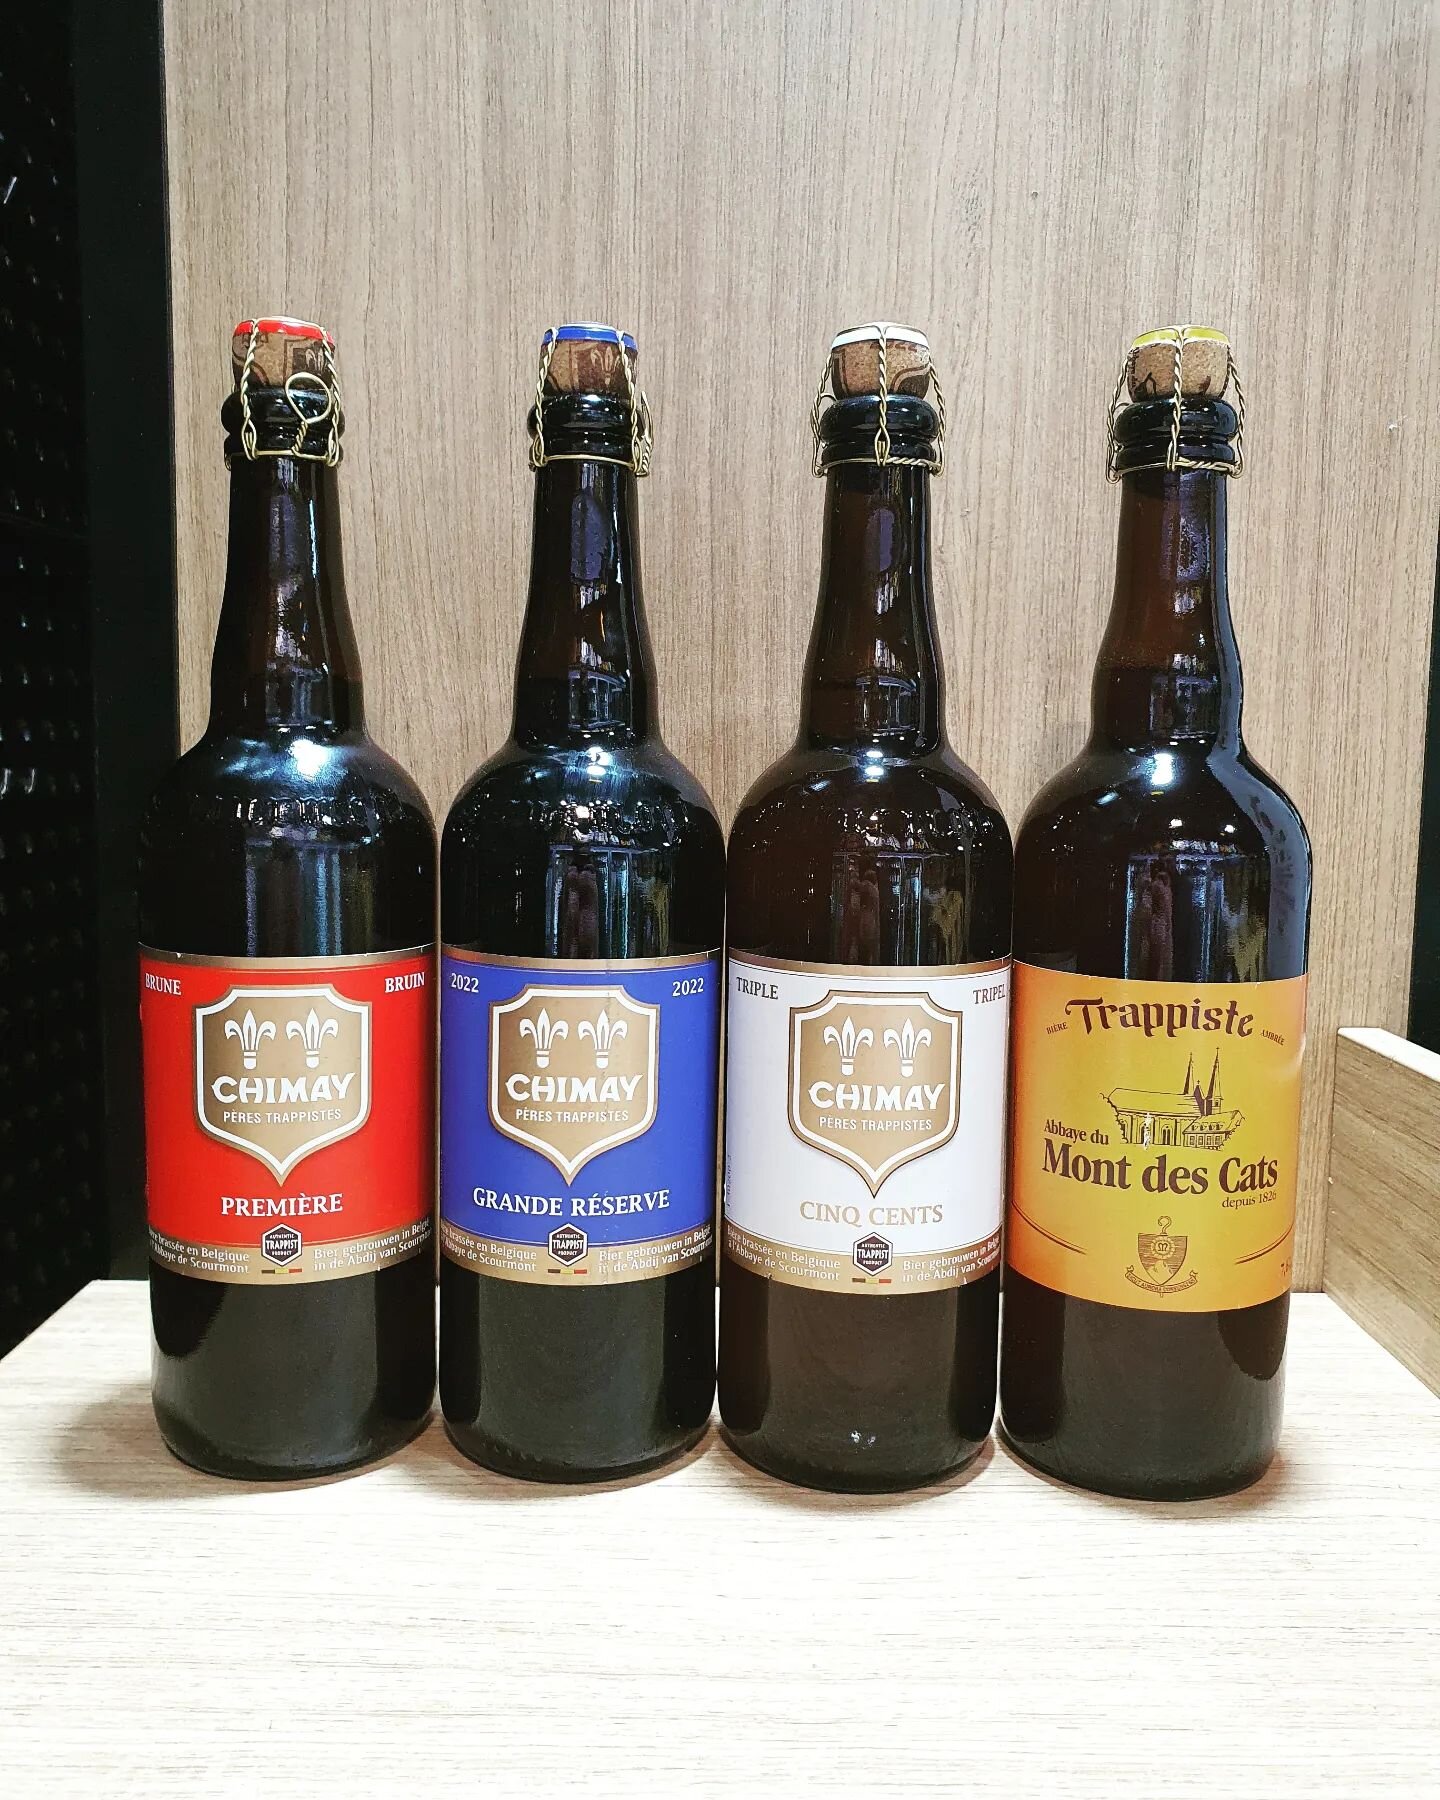 Feeling thirsty for a Belgium beer? Or looking to share some fantastic brews amongst friends?  Lots of fresh Belgium beers in store now in large sized bottles for this special occasions. 🇧🇪